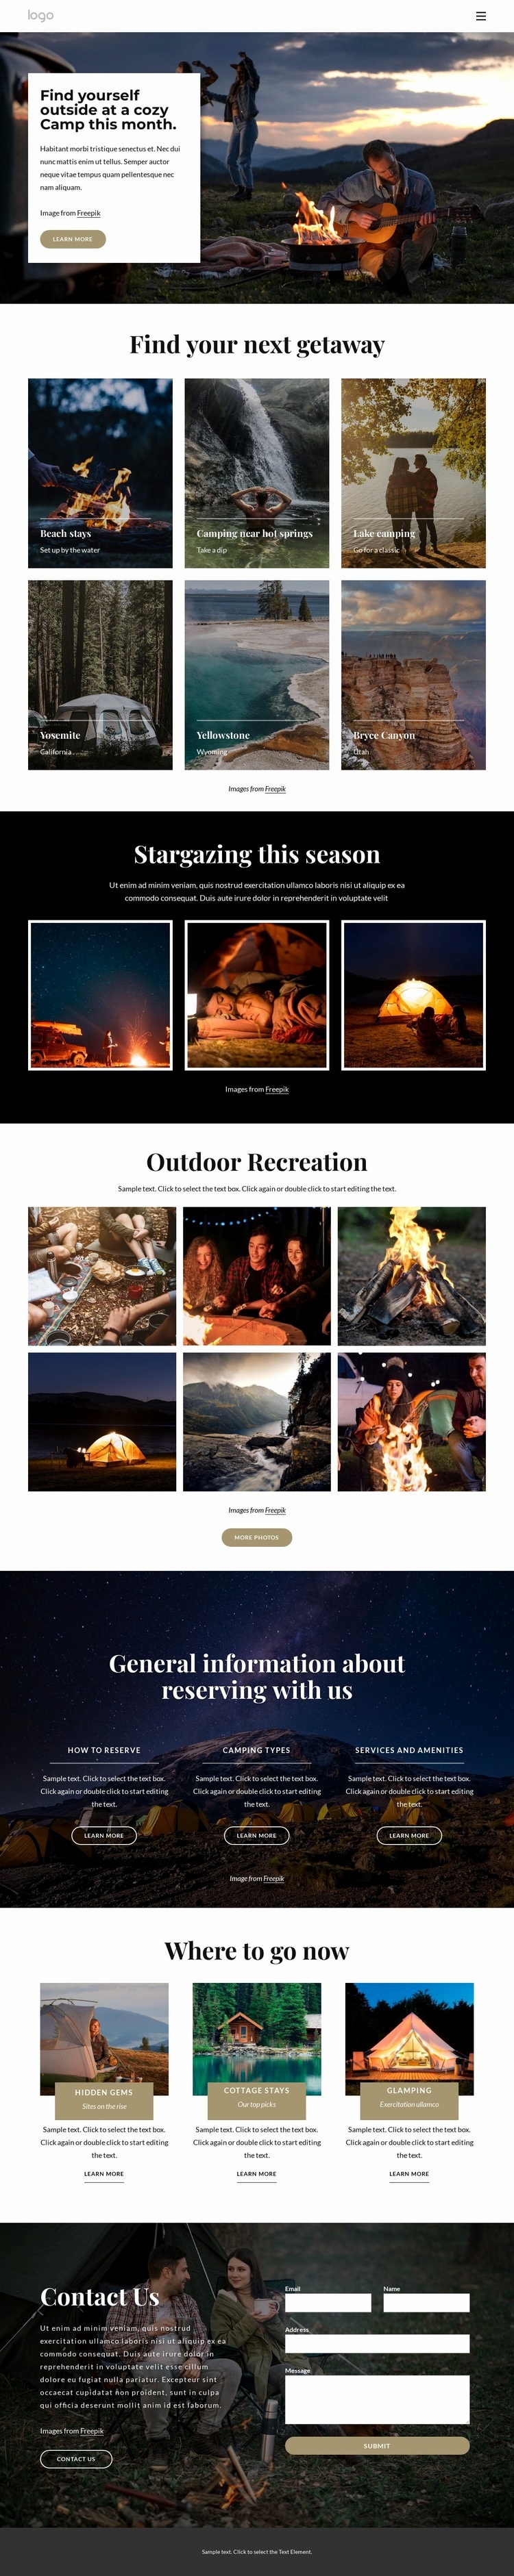 Going on a camping trip Web Page Design